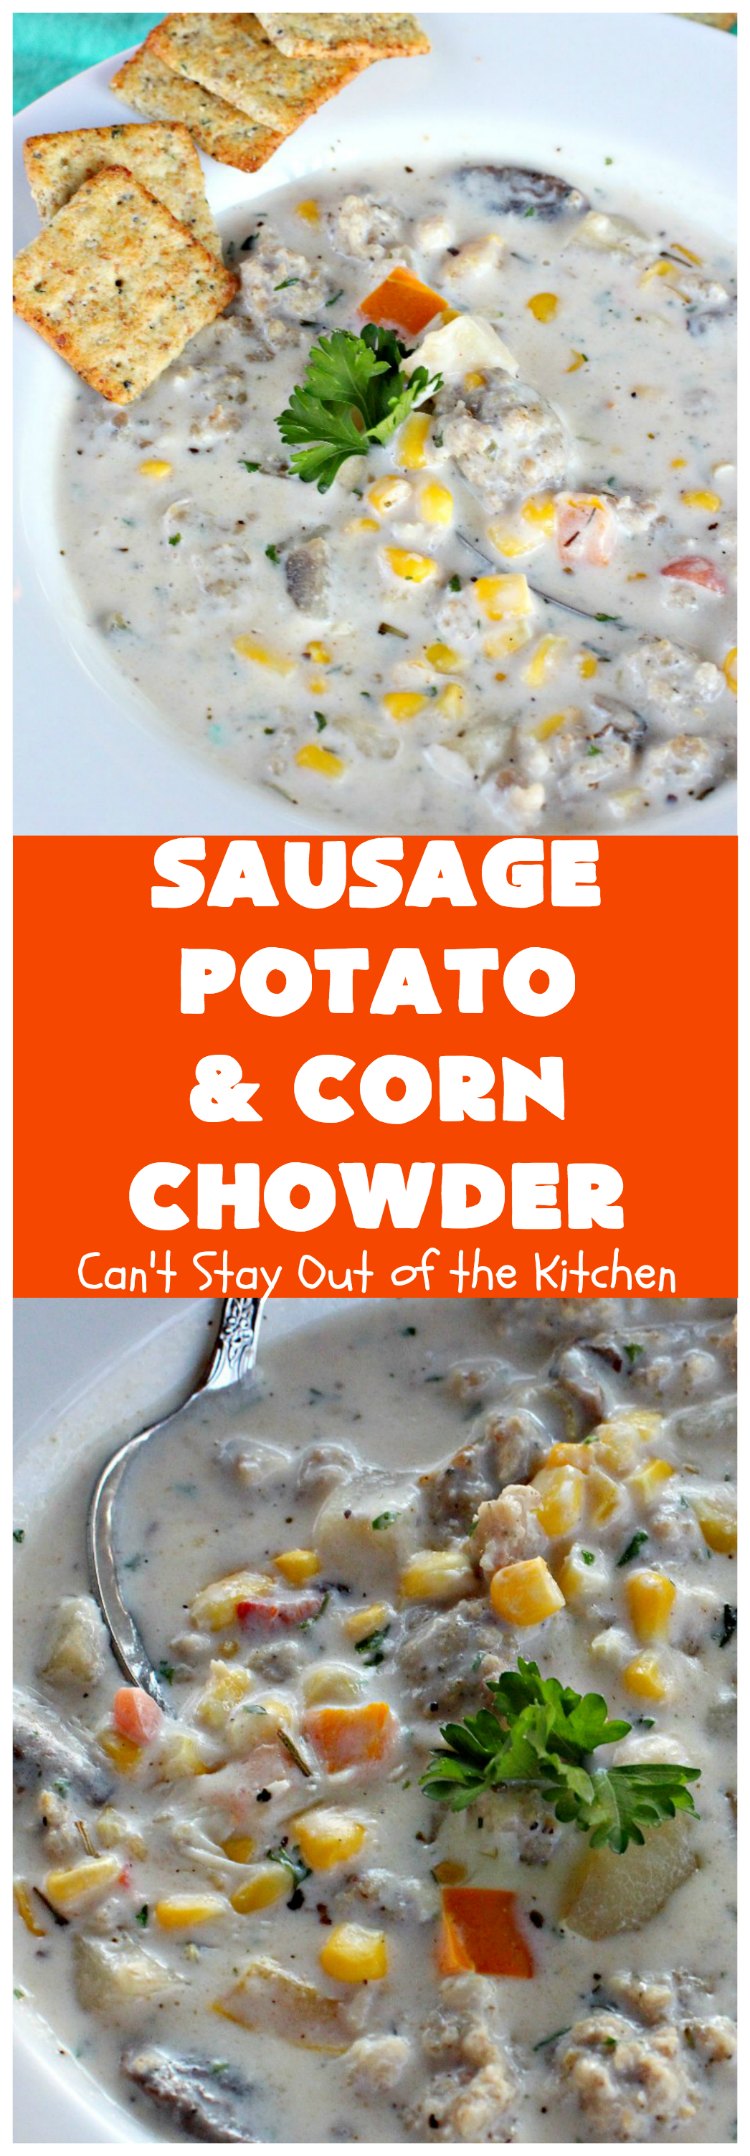 Sausage, Potato & Corn Chowder | Can't Stay Out of the Kitchen